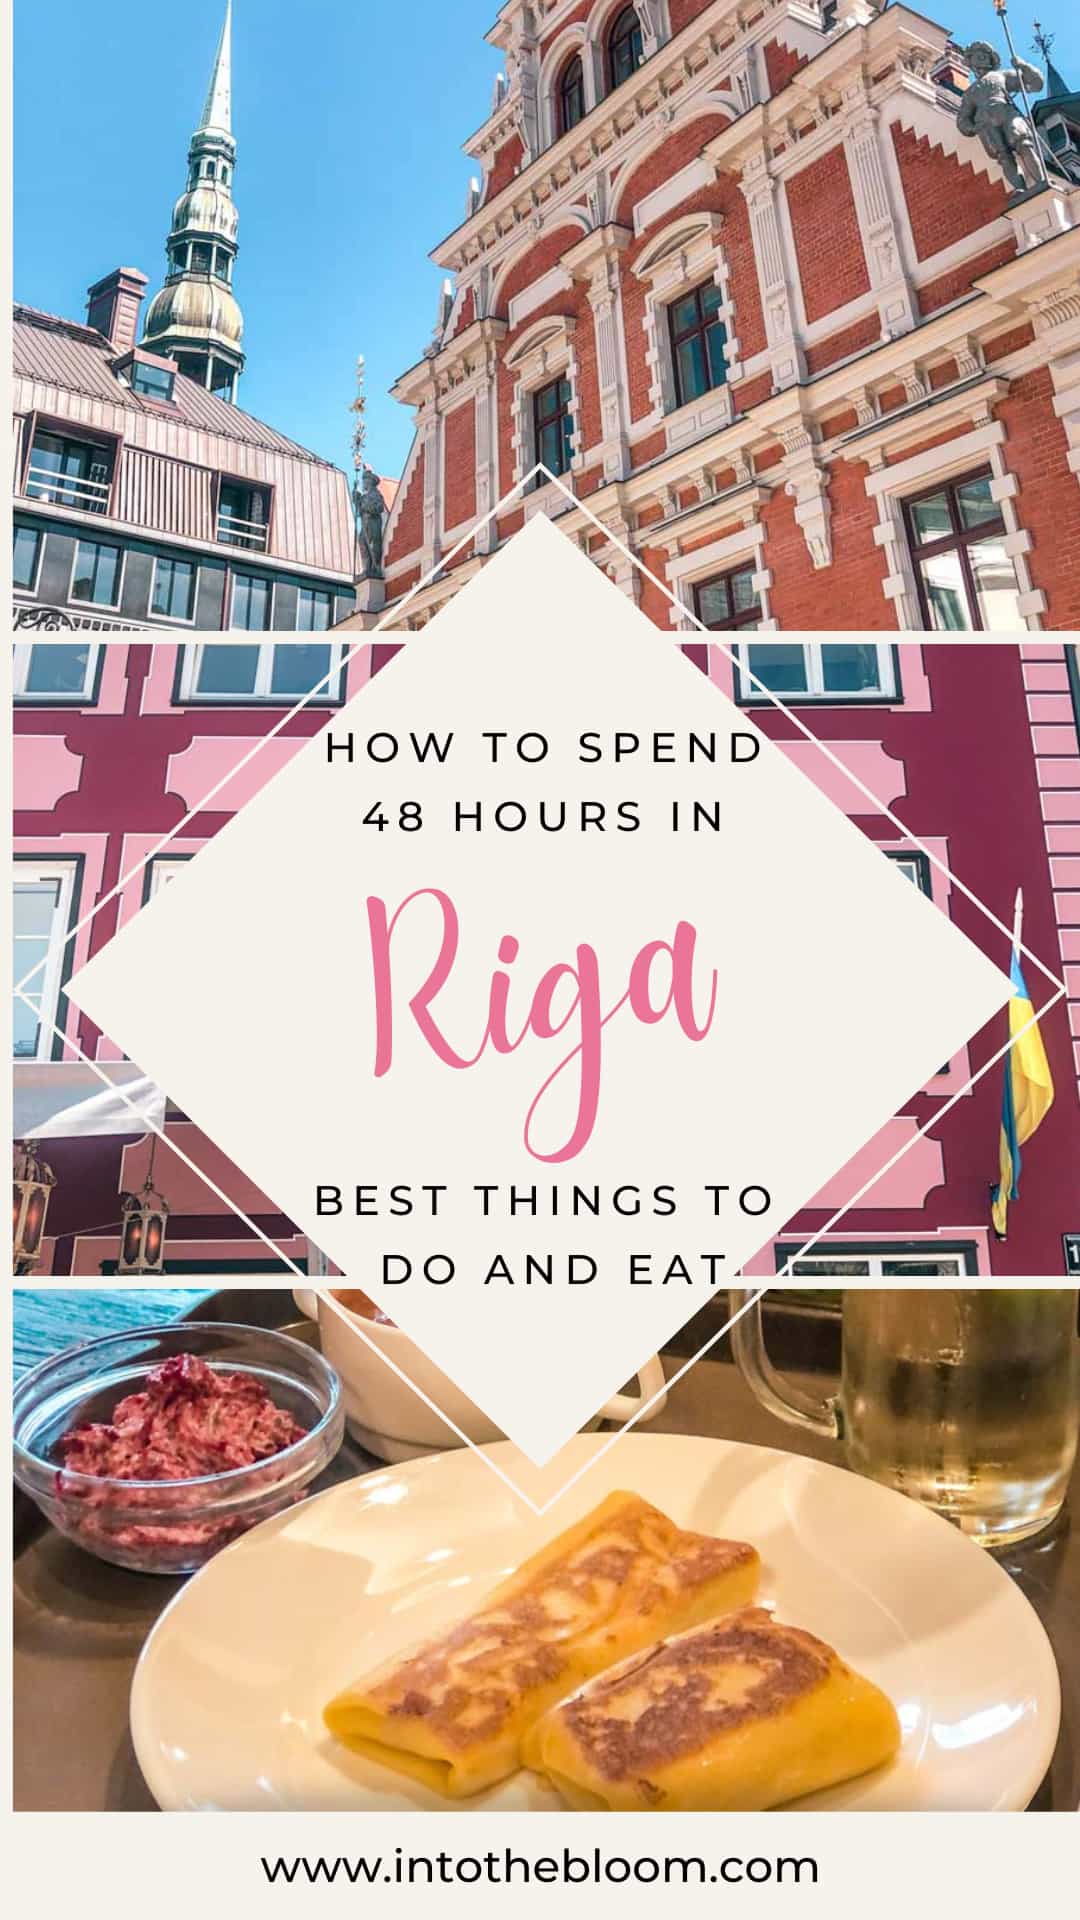 Riga Travel Guide - How to spend 48 hours in Riga - Best things to do and eat